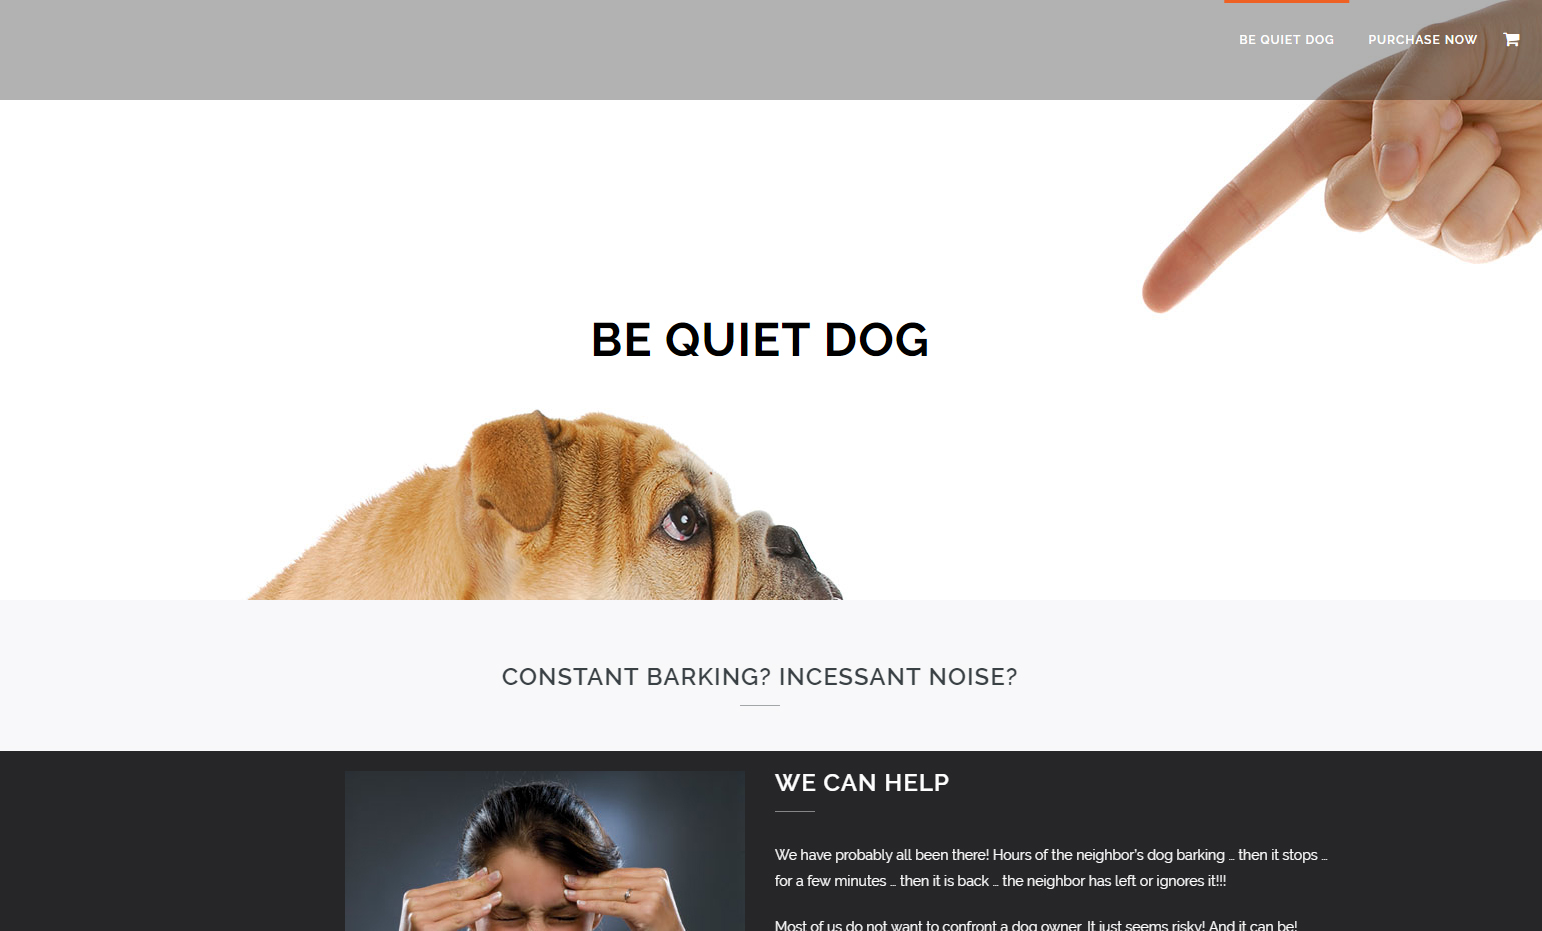 Cute dog looking up at scolding finger